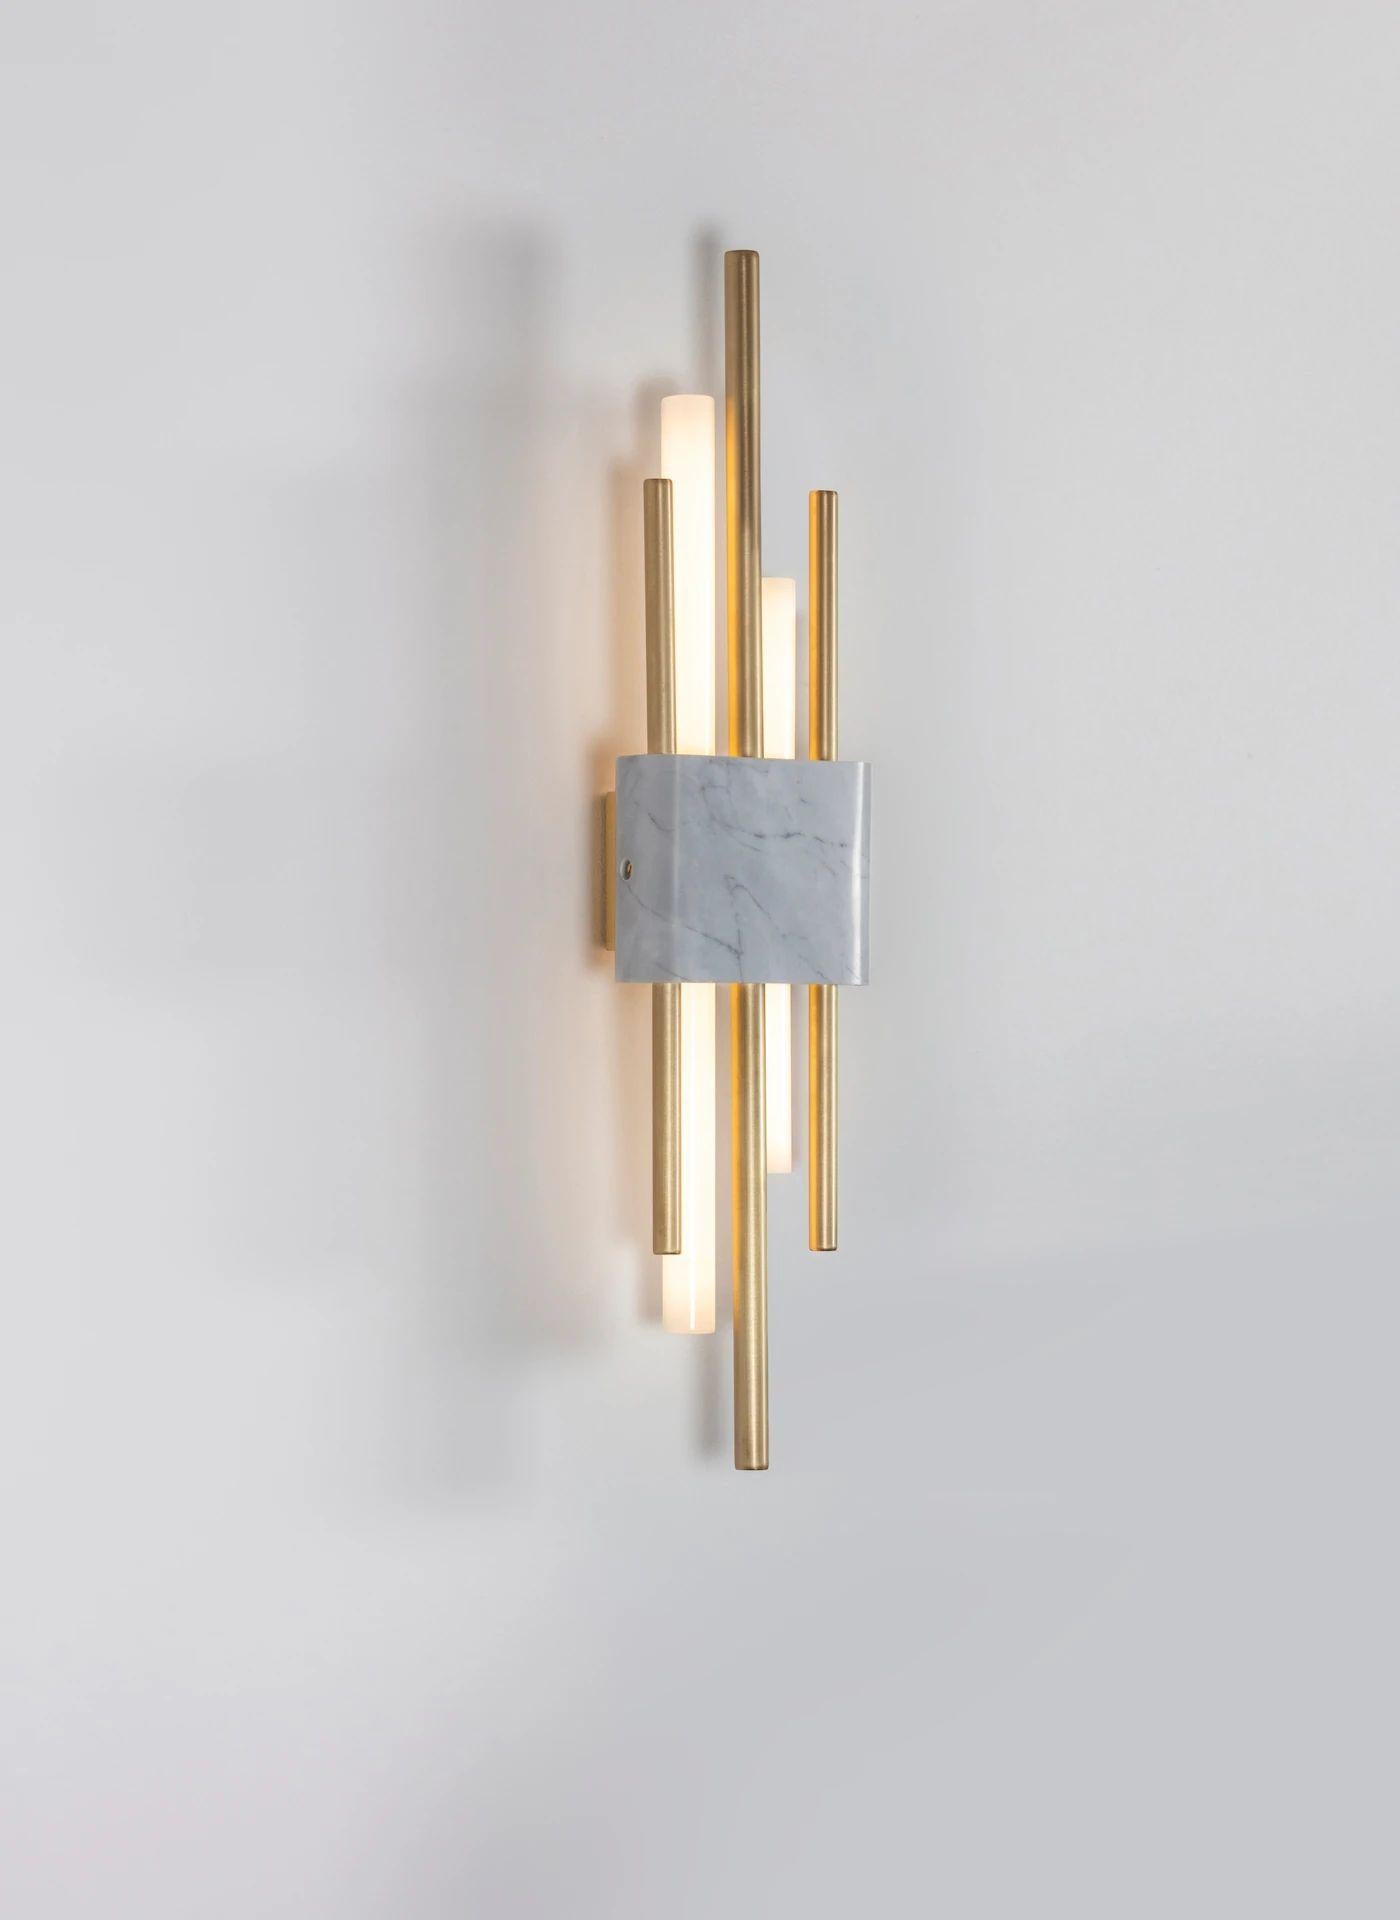 Tanto wall light, double, white marble by Bert Frank
Dimensions: 15 x 9 x H 65 cm
Materials: brushed brass, white carrara marble

When Adam Yeats and Robbie Llewellyn founded Bert Frank in 2013 it was a meeting of minds and the start of a